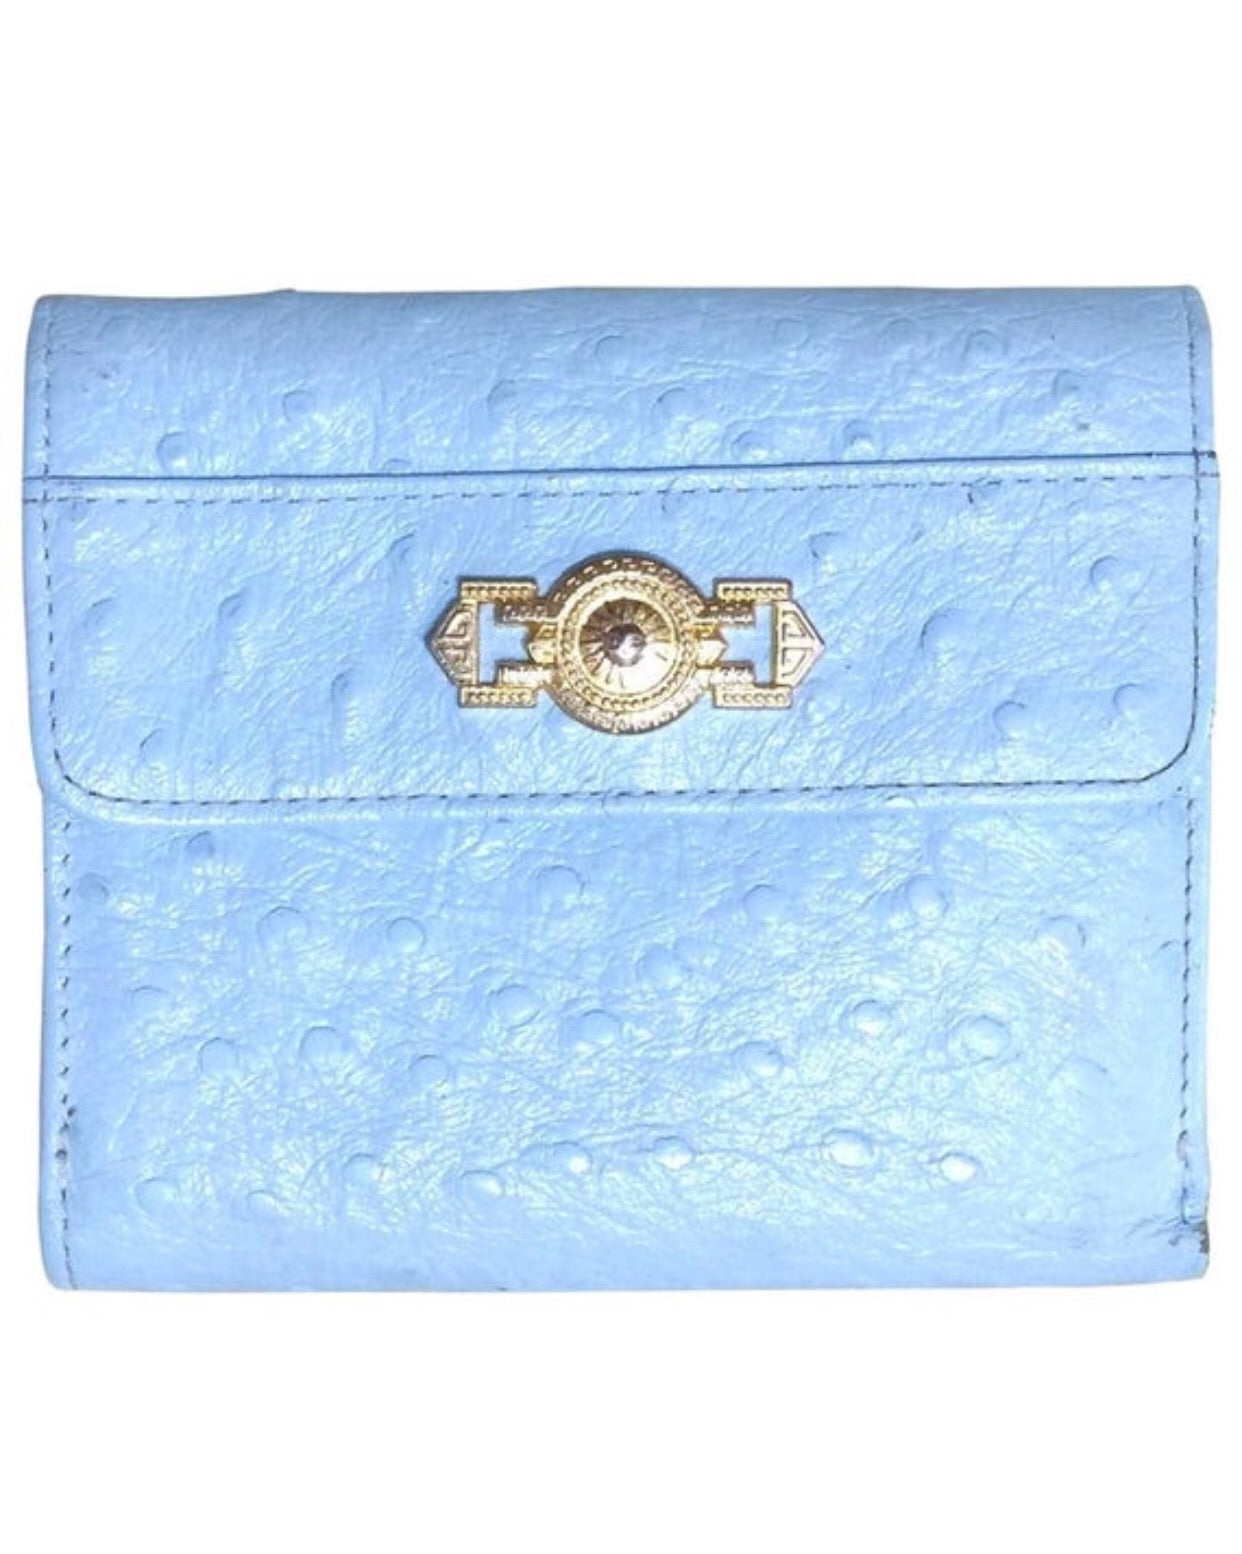 Vintage Gianni Versace ostrich-embossed light blue leather wallet with golden sunburst charm. Coin purse, card,bill case. Best gift